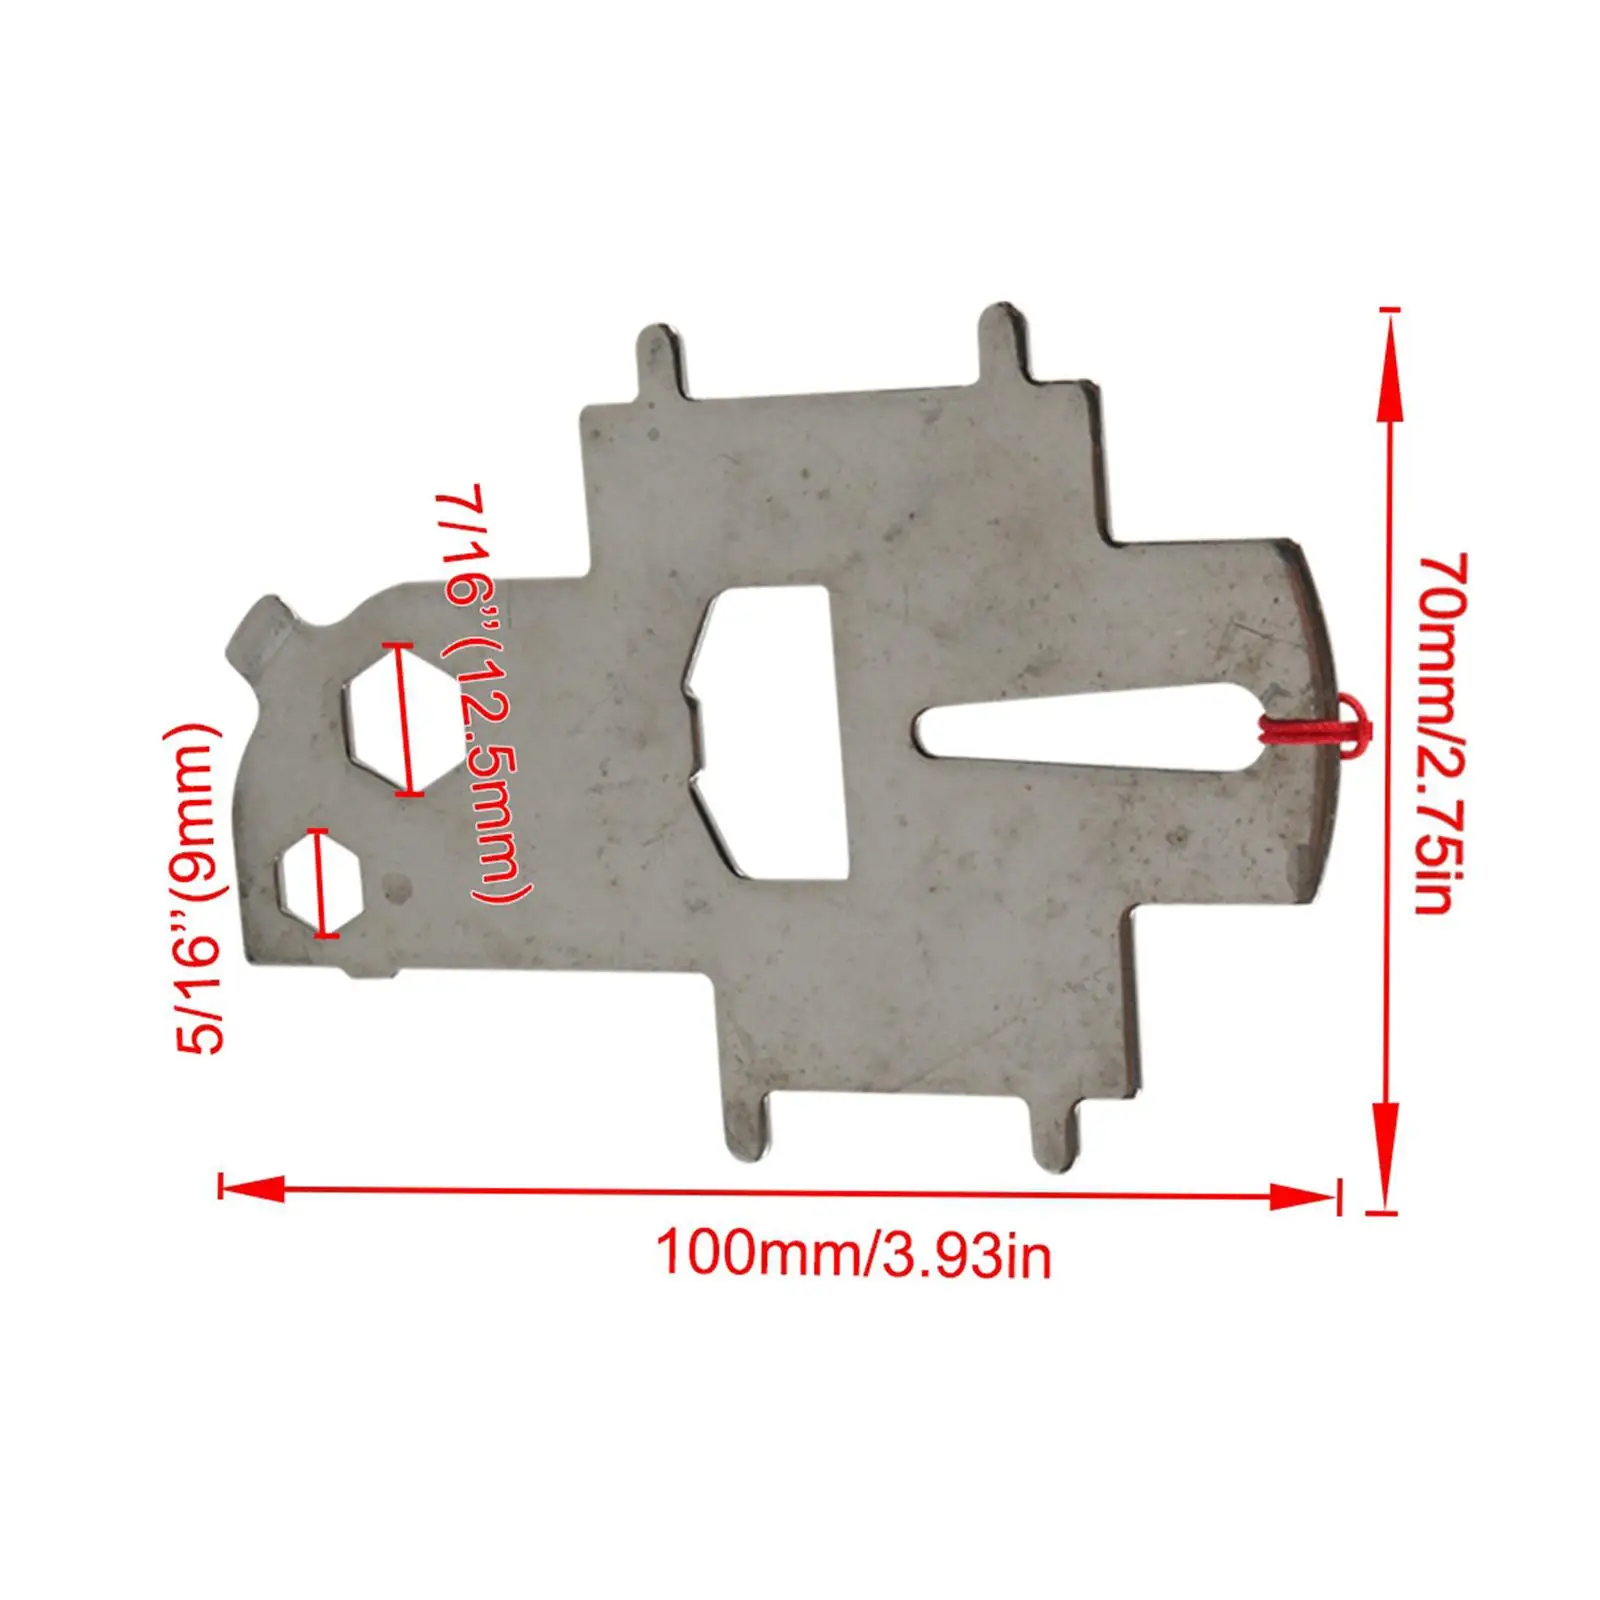 3Pcs Deck Fill Plate Key Spare Parts Premium for Marine Boat Waste Fill